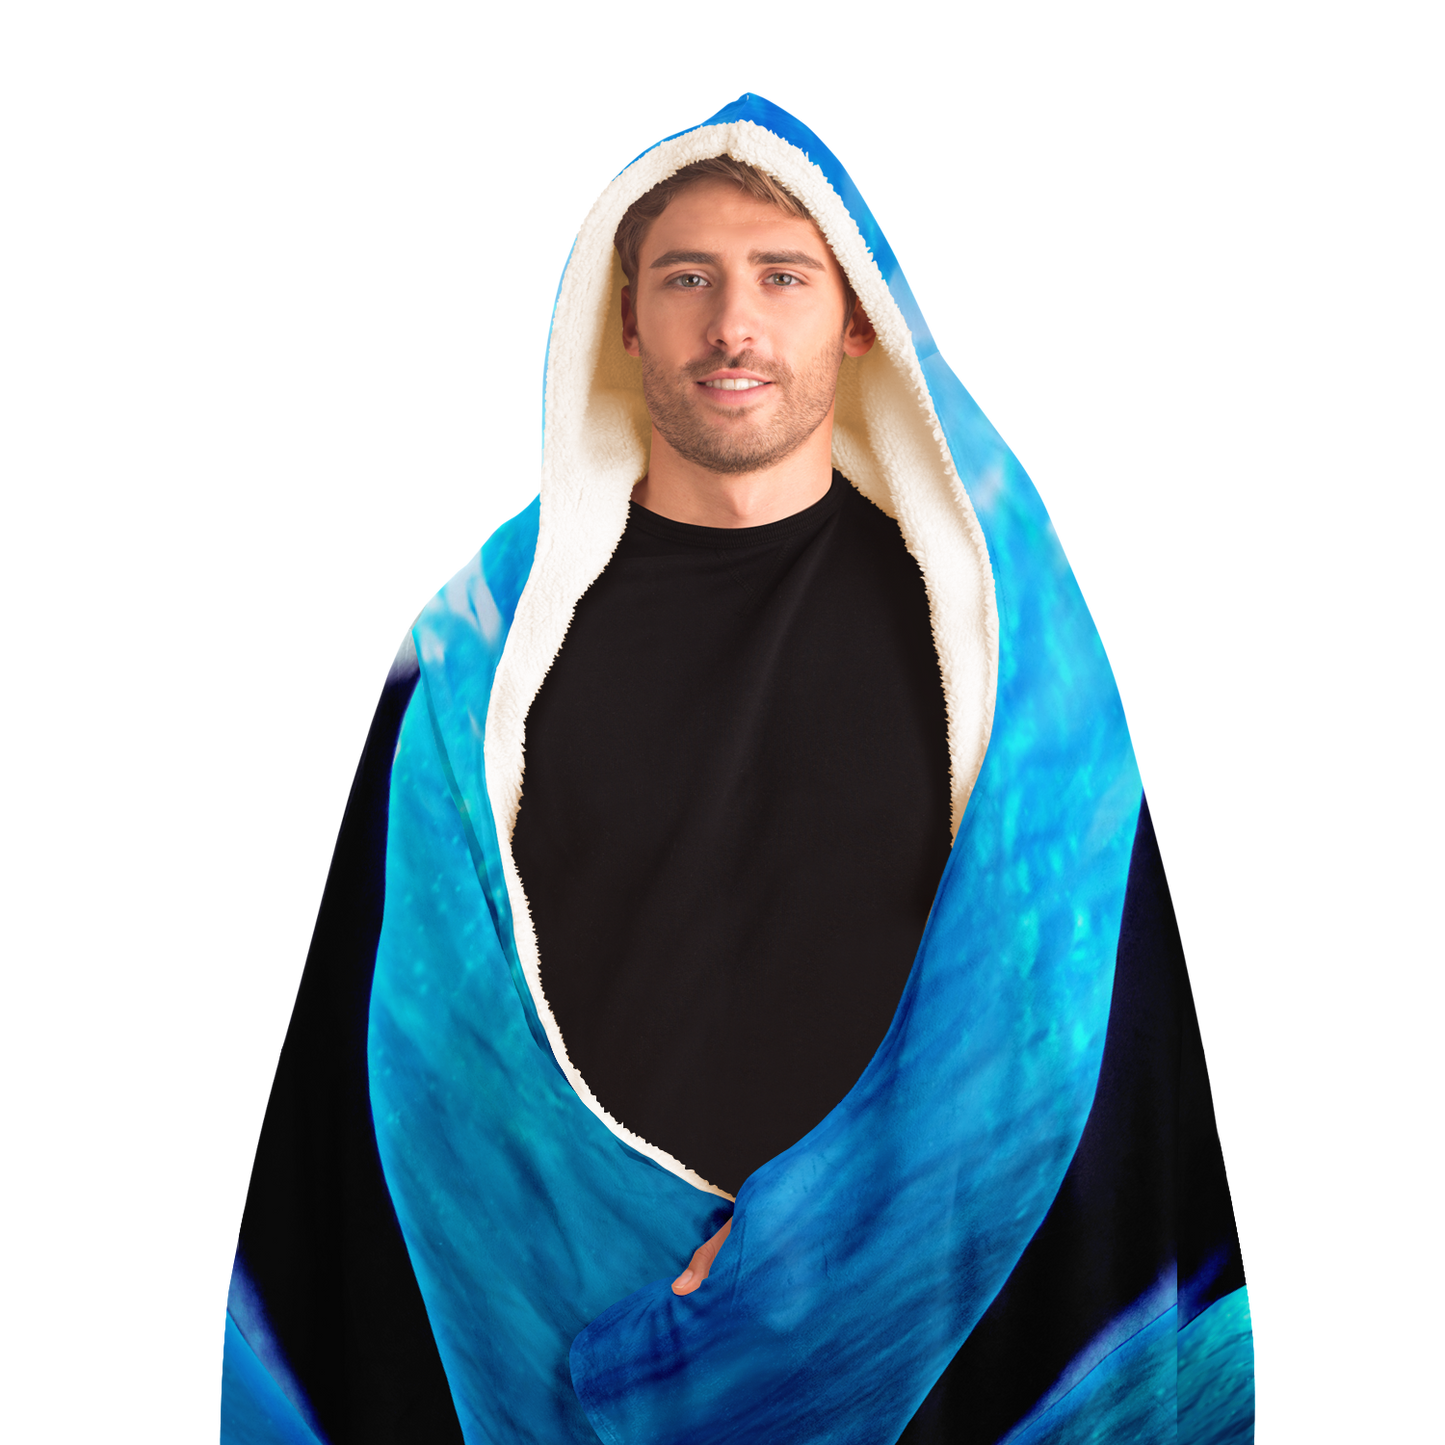 Manta ray microfiber hooded blanket wrapped around front view